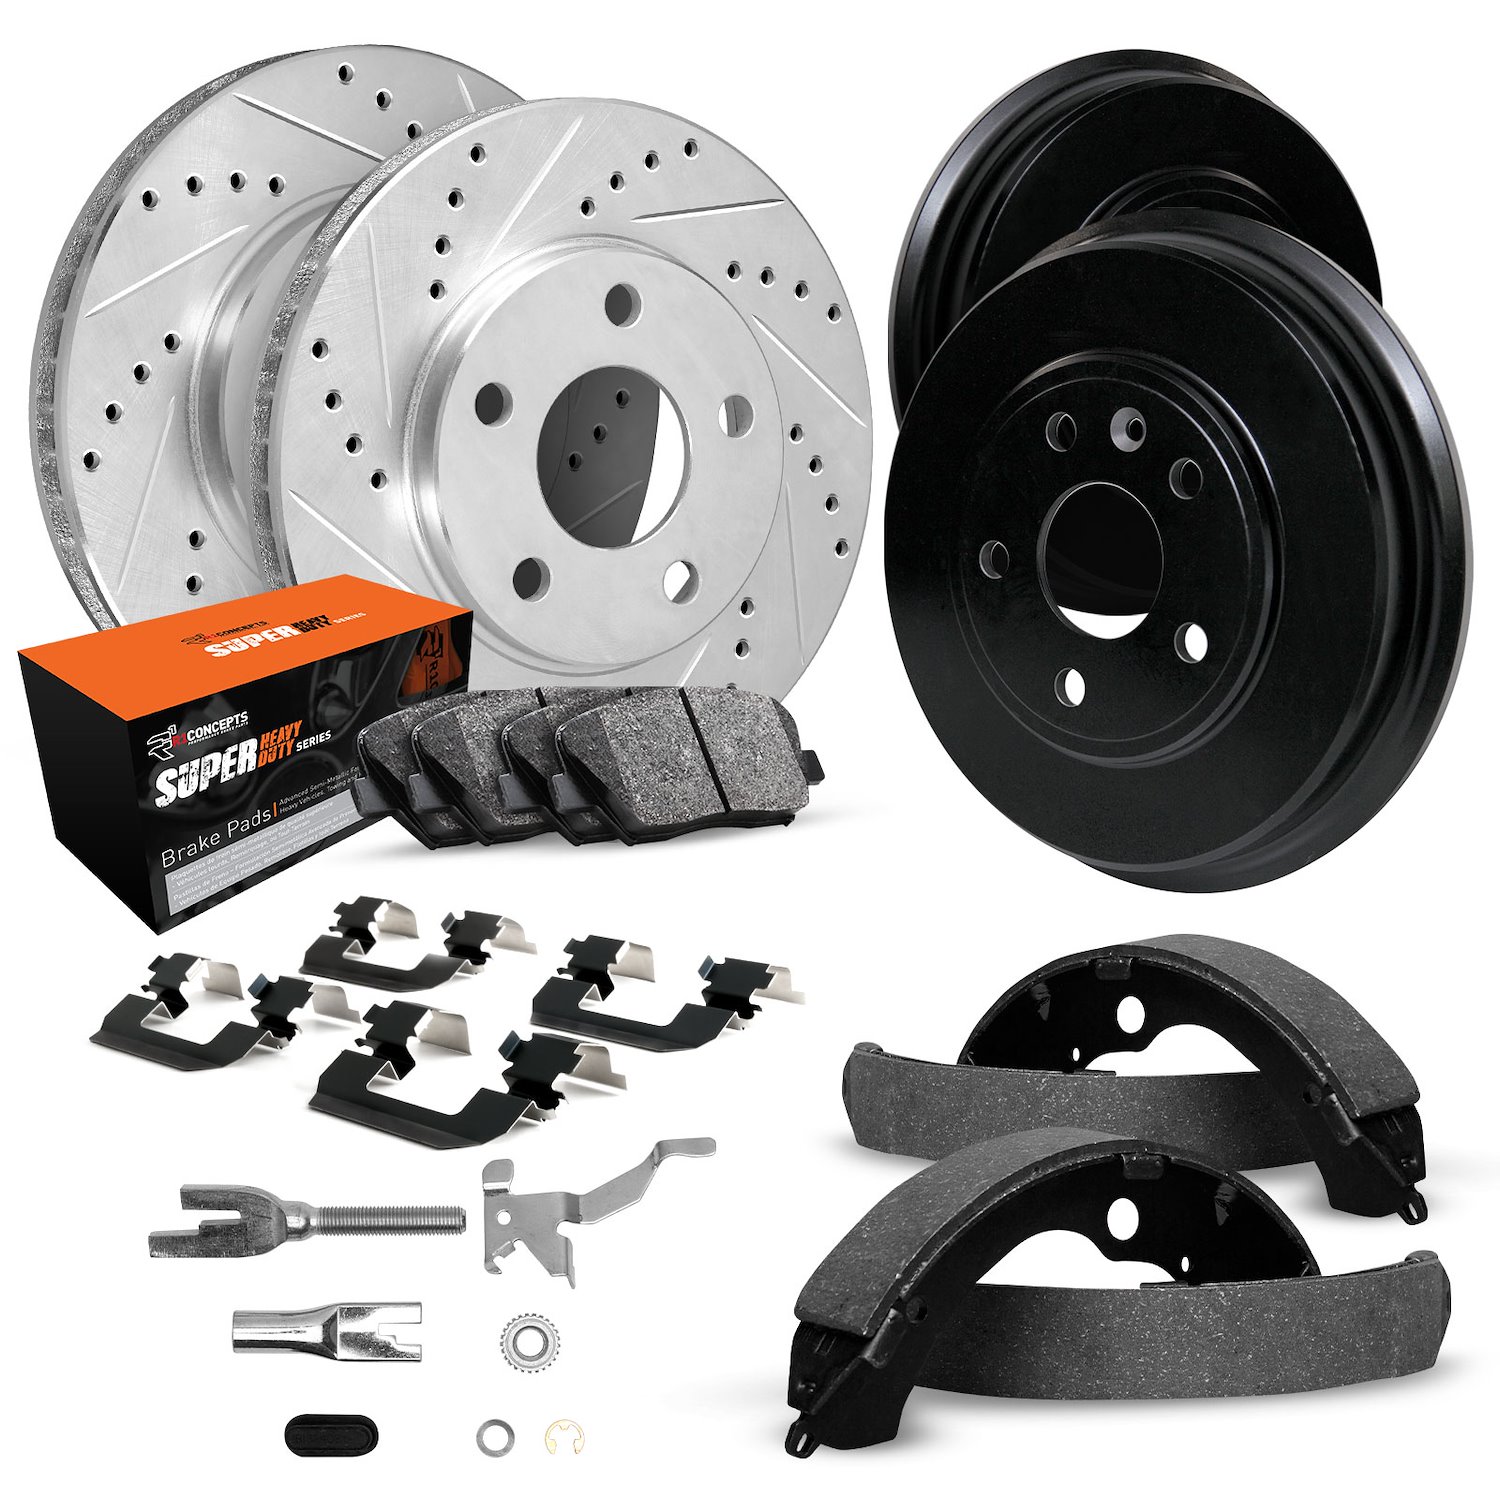 E-Line Drilled/Slotted Silver Rotor & Drum Set w/Super-Duty Pads, Shoes/Hardware/Adjusters, 1987-1991 Ford/Lincoln/Mercury/Mazda